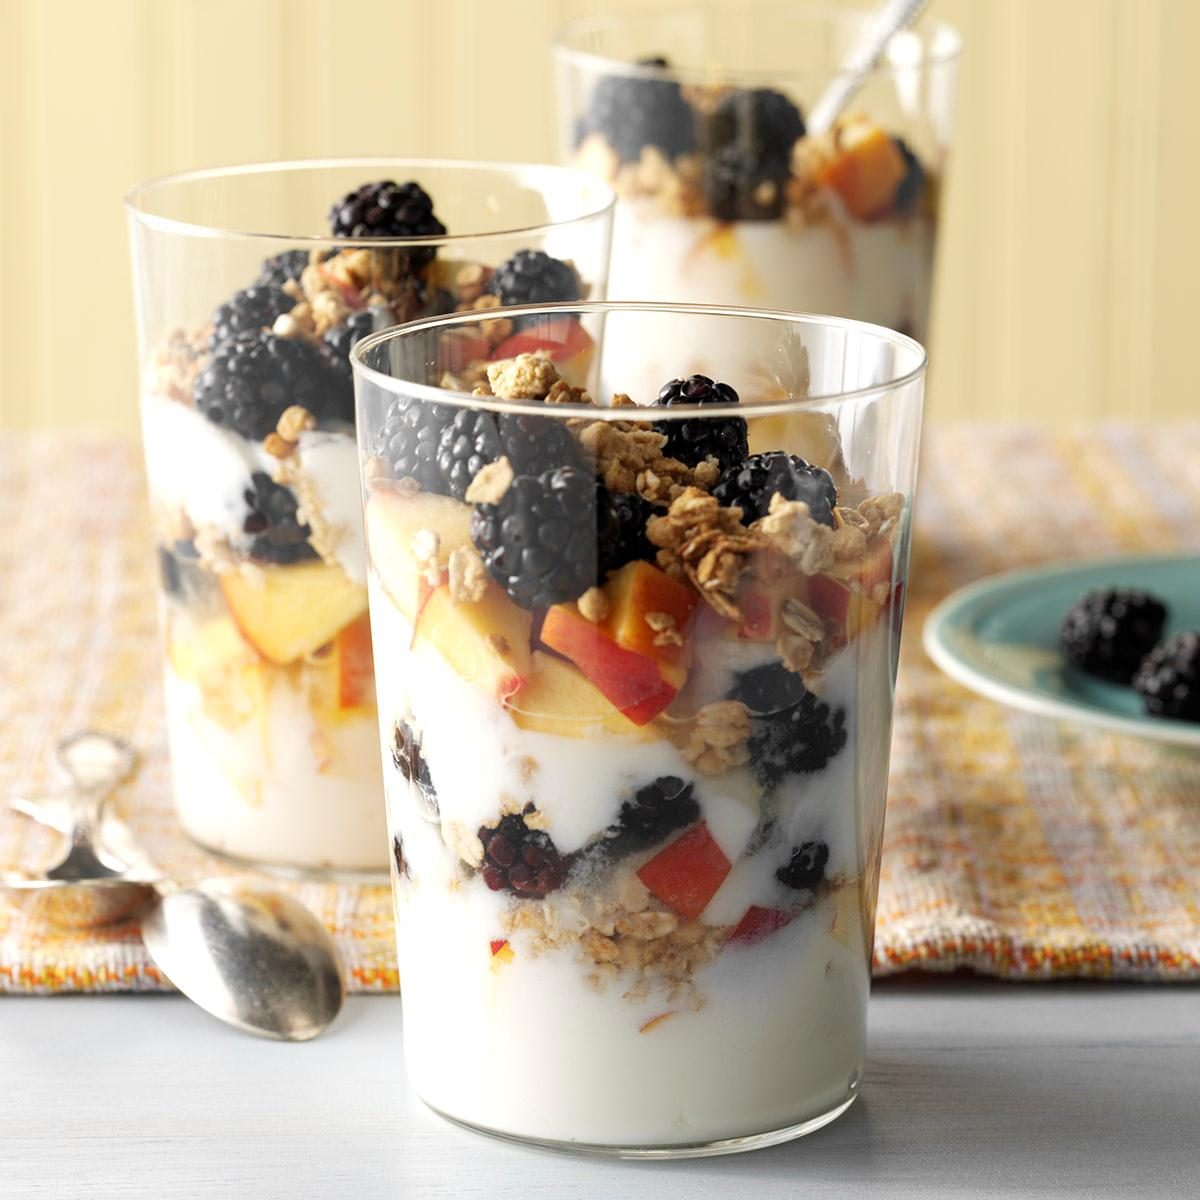 Day 7 Breakfast: Rise and Shine Parfait